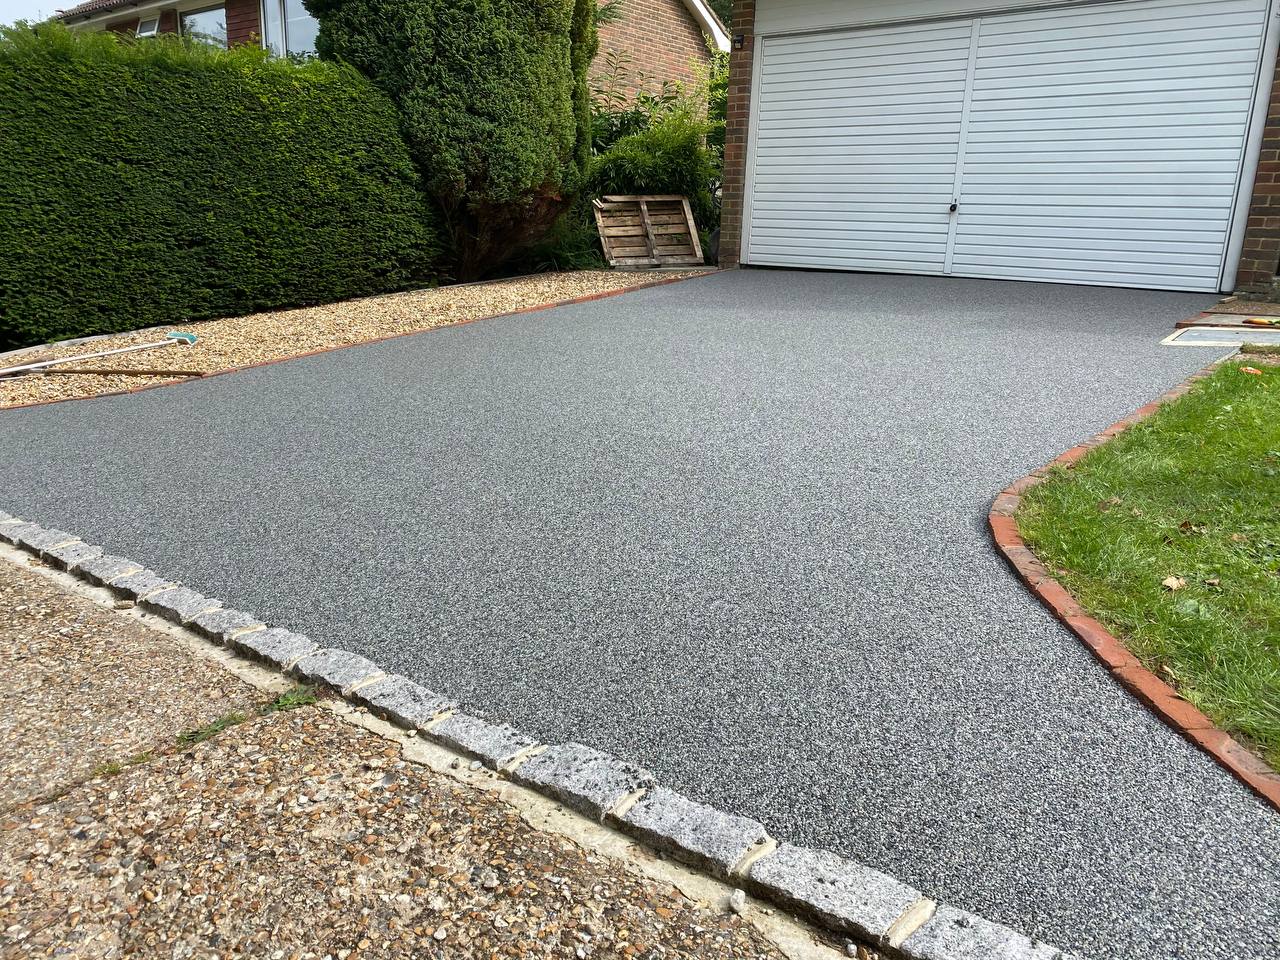 This is a photo of a new resin bound driveway carried out in Oldham All works done by Oldham Resin Driveways